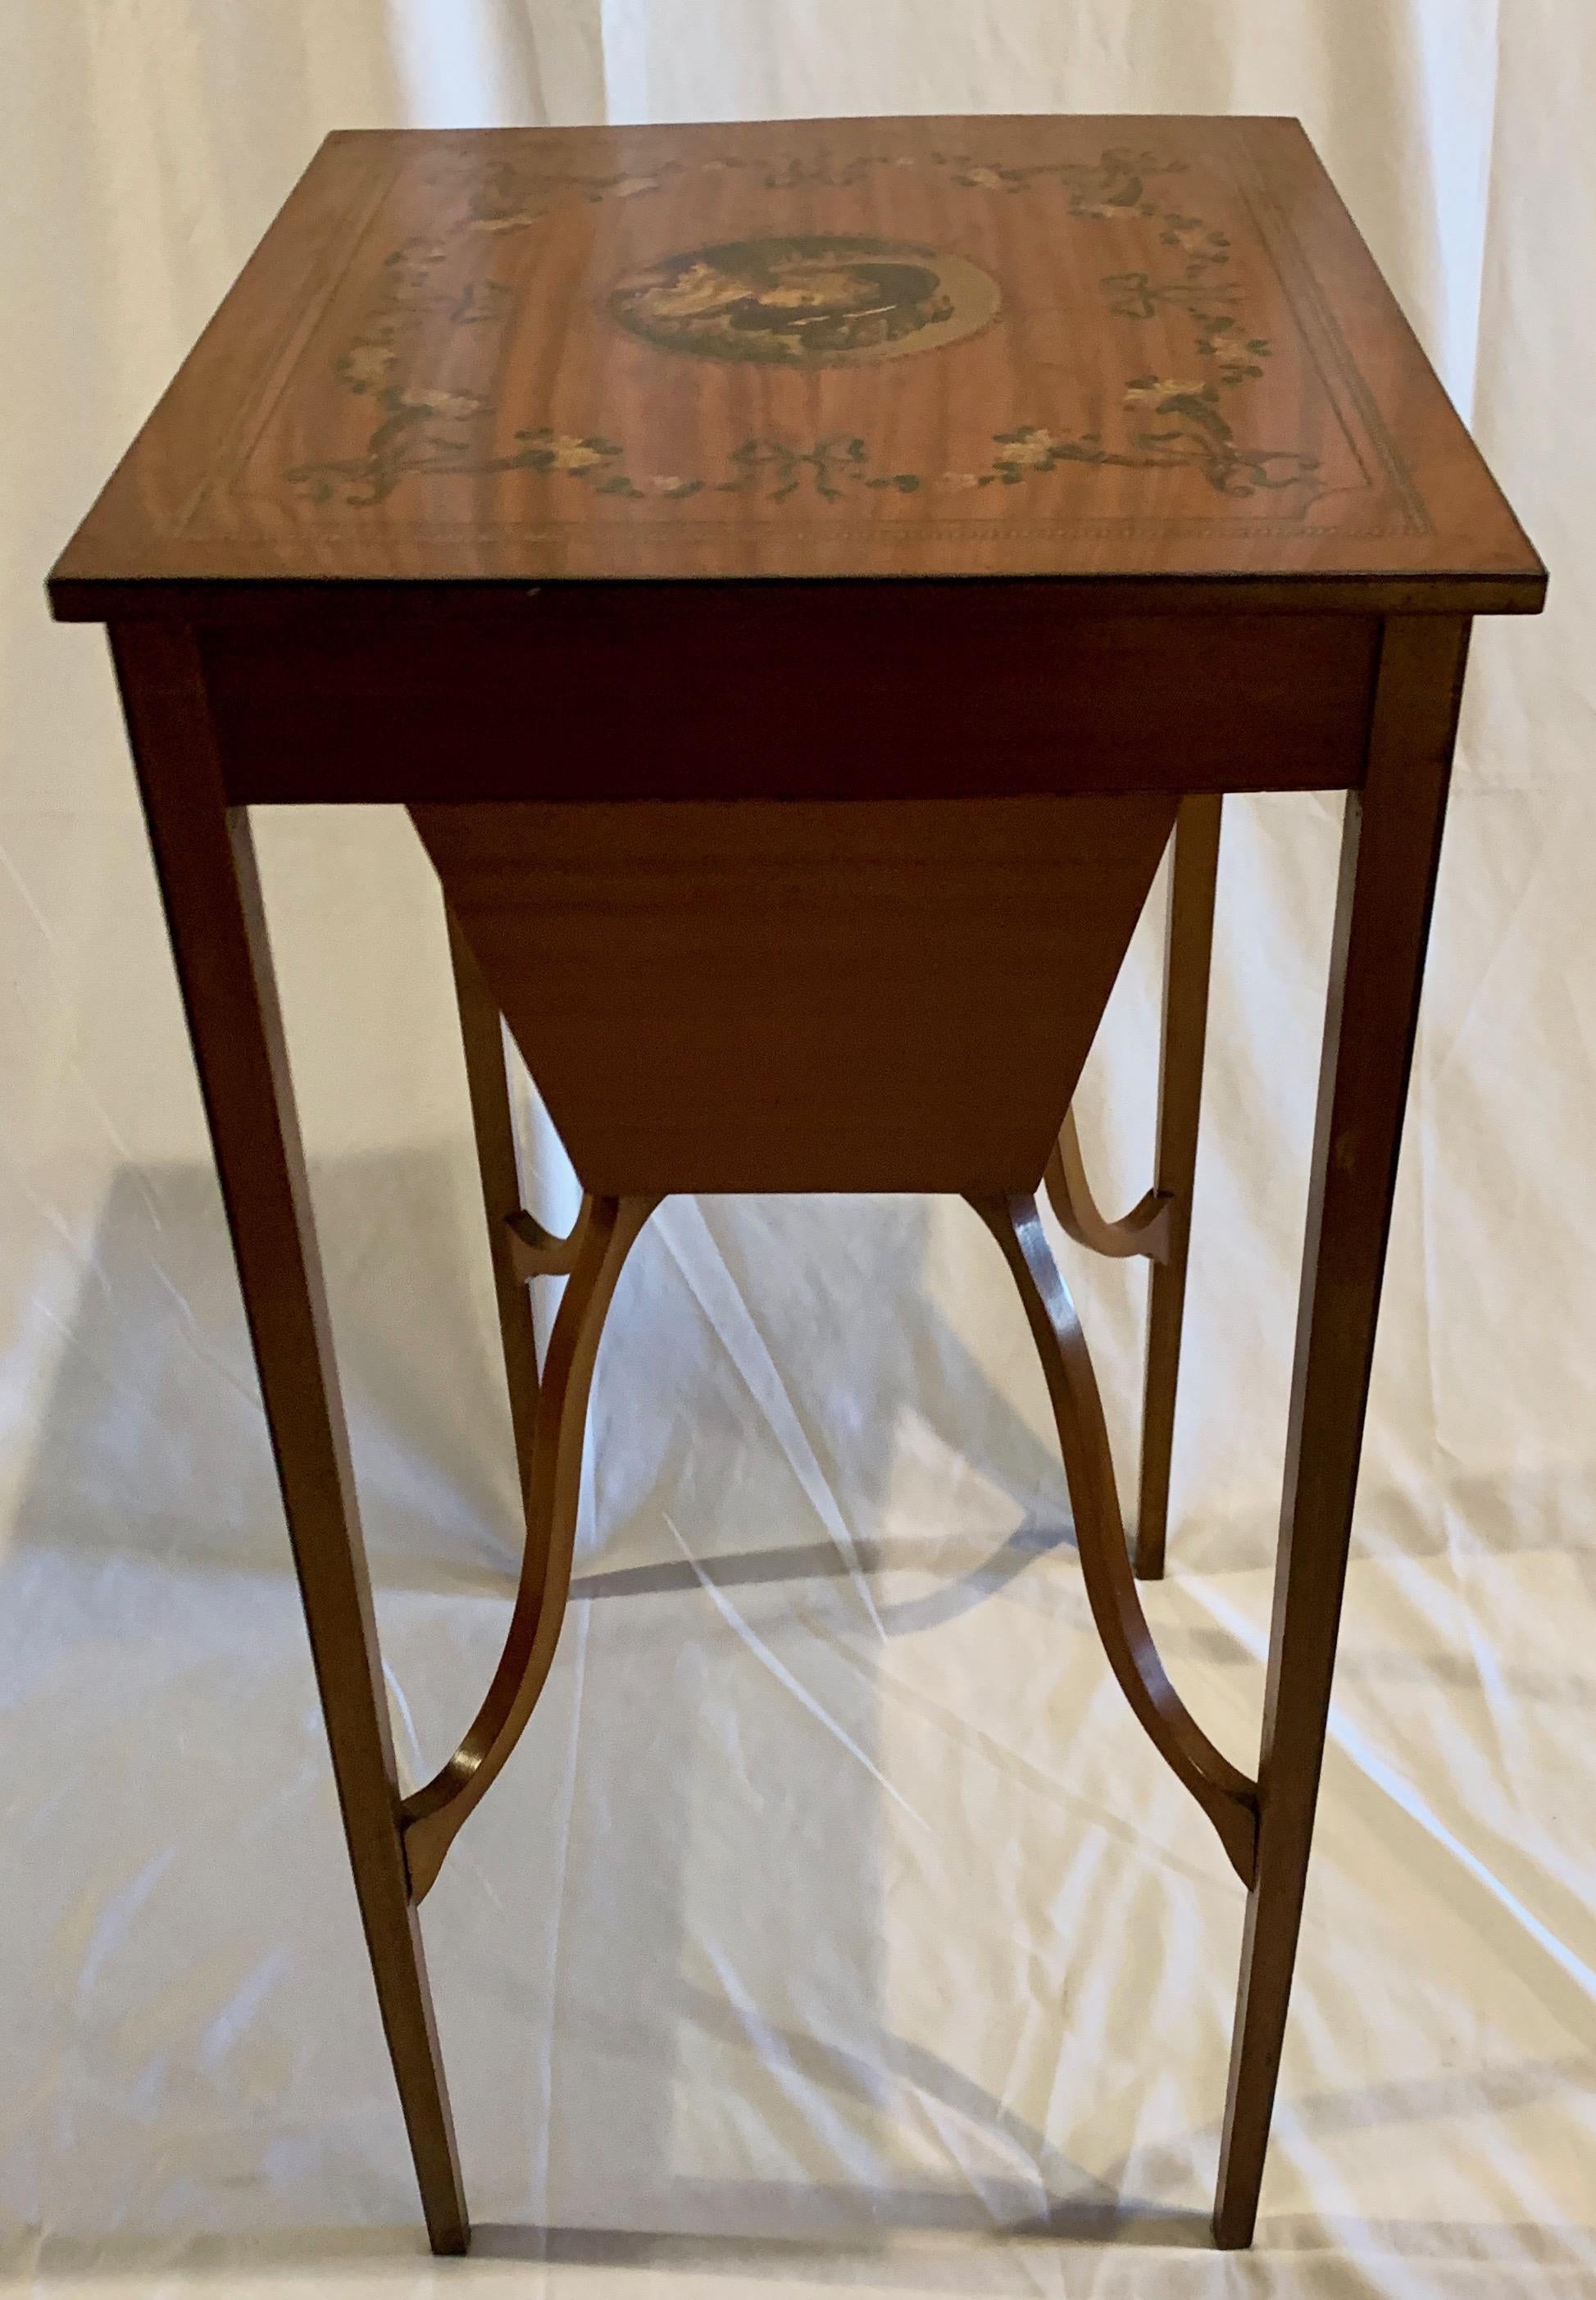 This sewing table is lovely and beautifully decorated, with the floral garlands surrounding a very well-outfitted lady sporting a large hat with plumage. There is plenty of storage in the sewing drawer and the satinwood's color is soft and